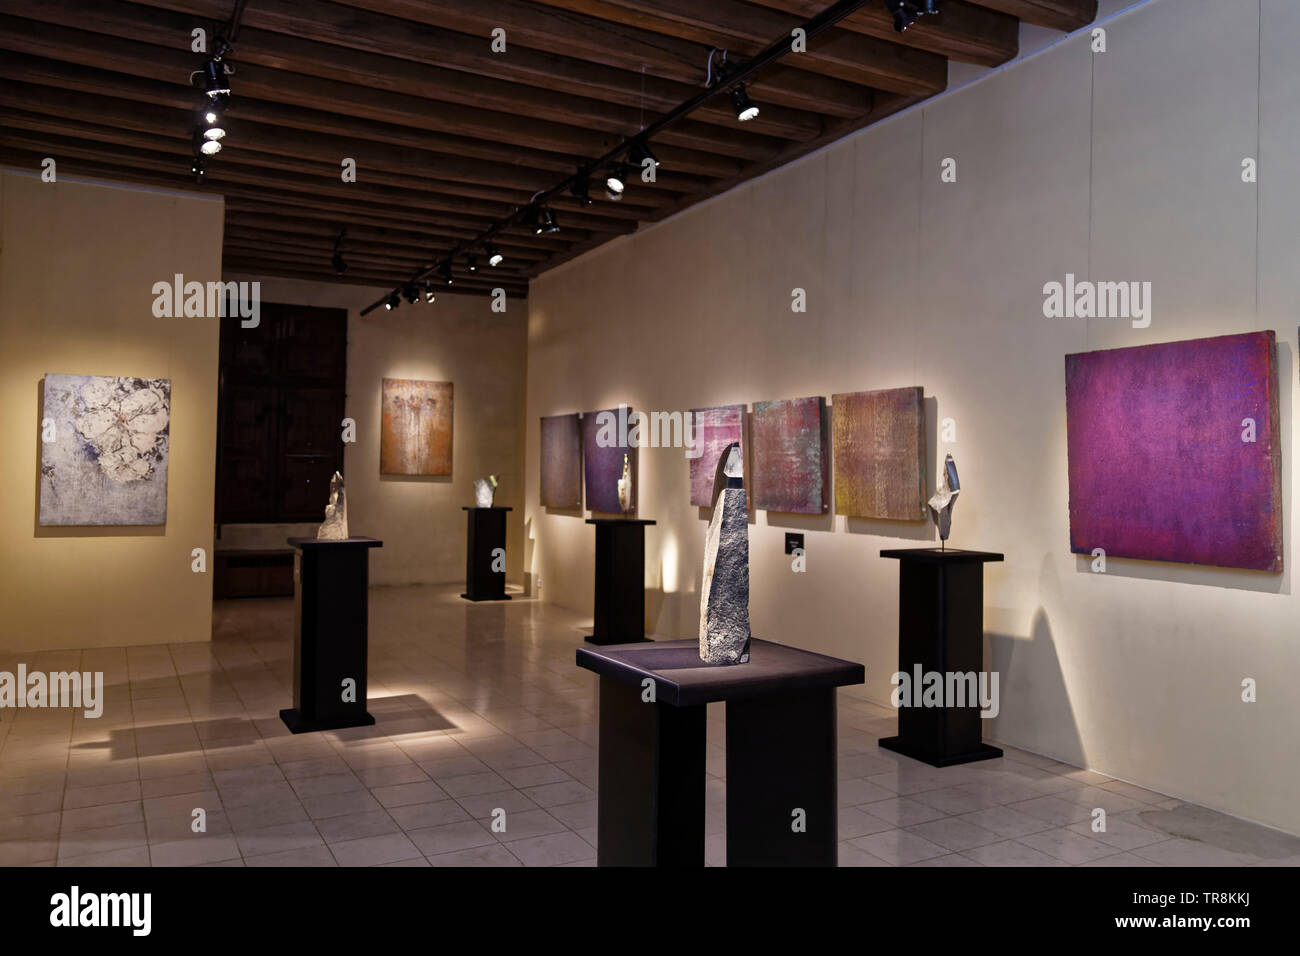 Tours, France.24th May,2019.Artworks of Fournier & Kolb at Exhibition Re-naissance(s) of the Capazza Gallery. ©:Veronique Phitoussi/Alamy Stock Photo Stock Photo